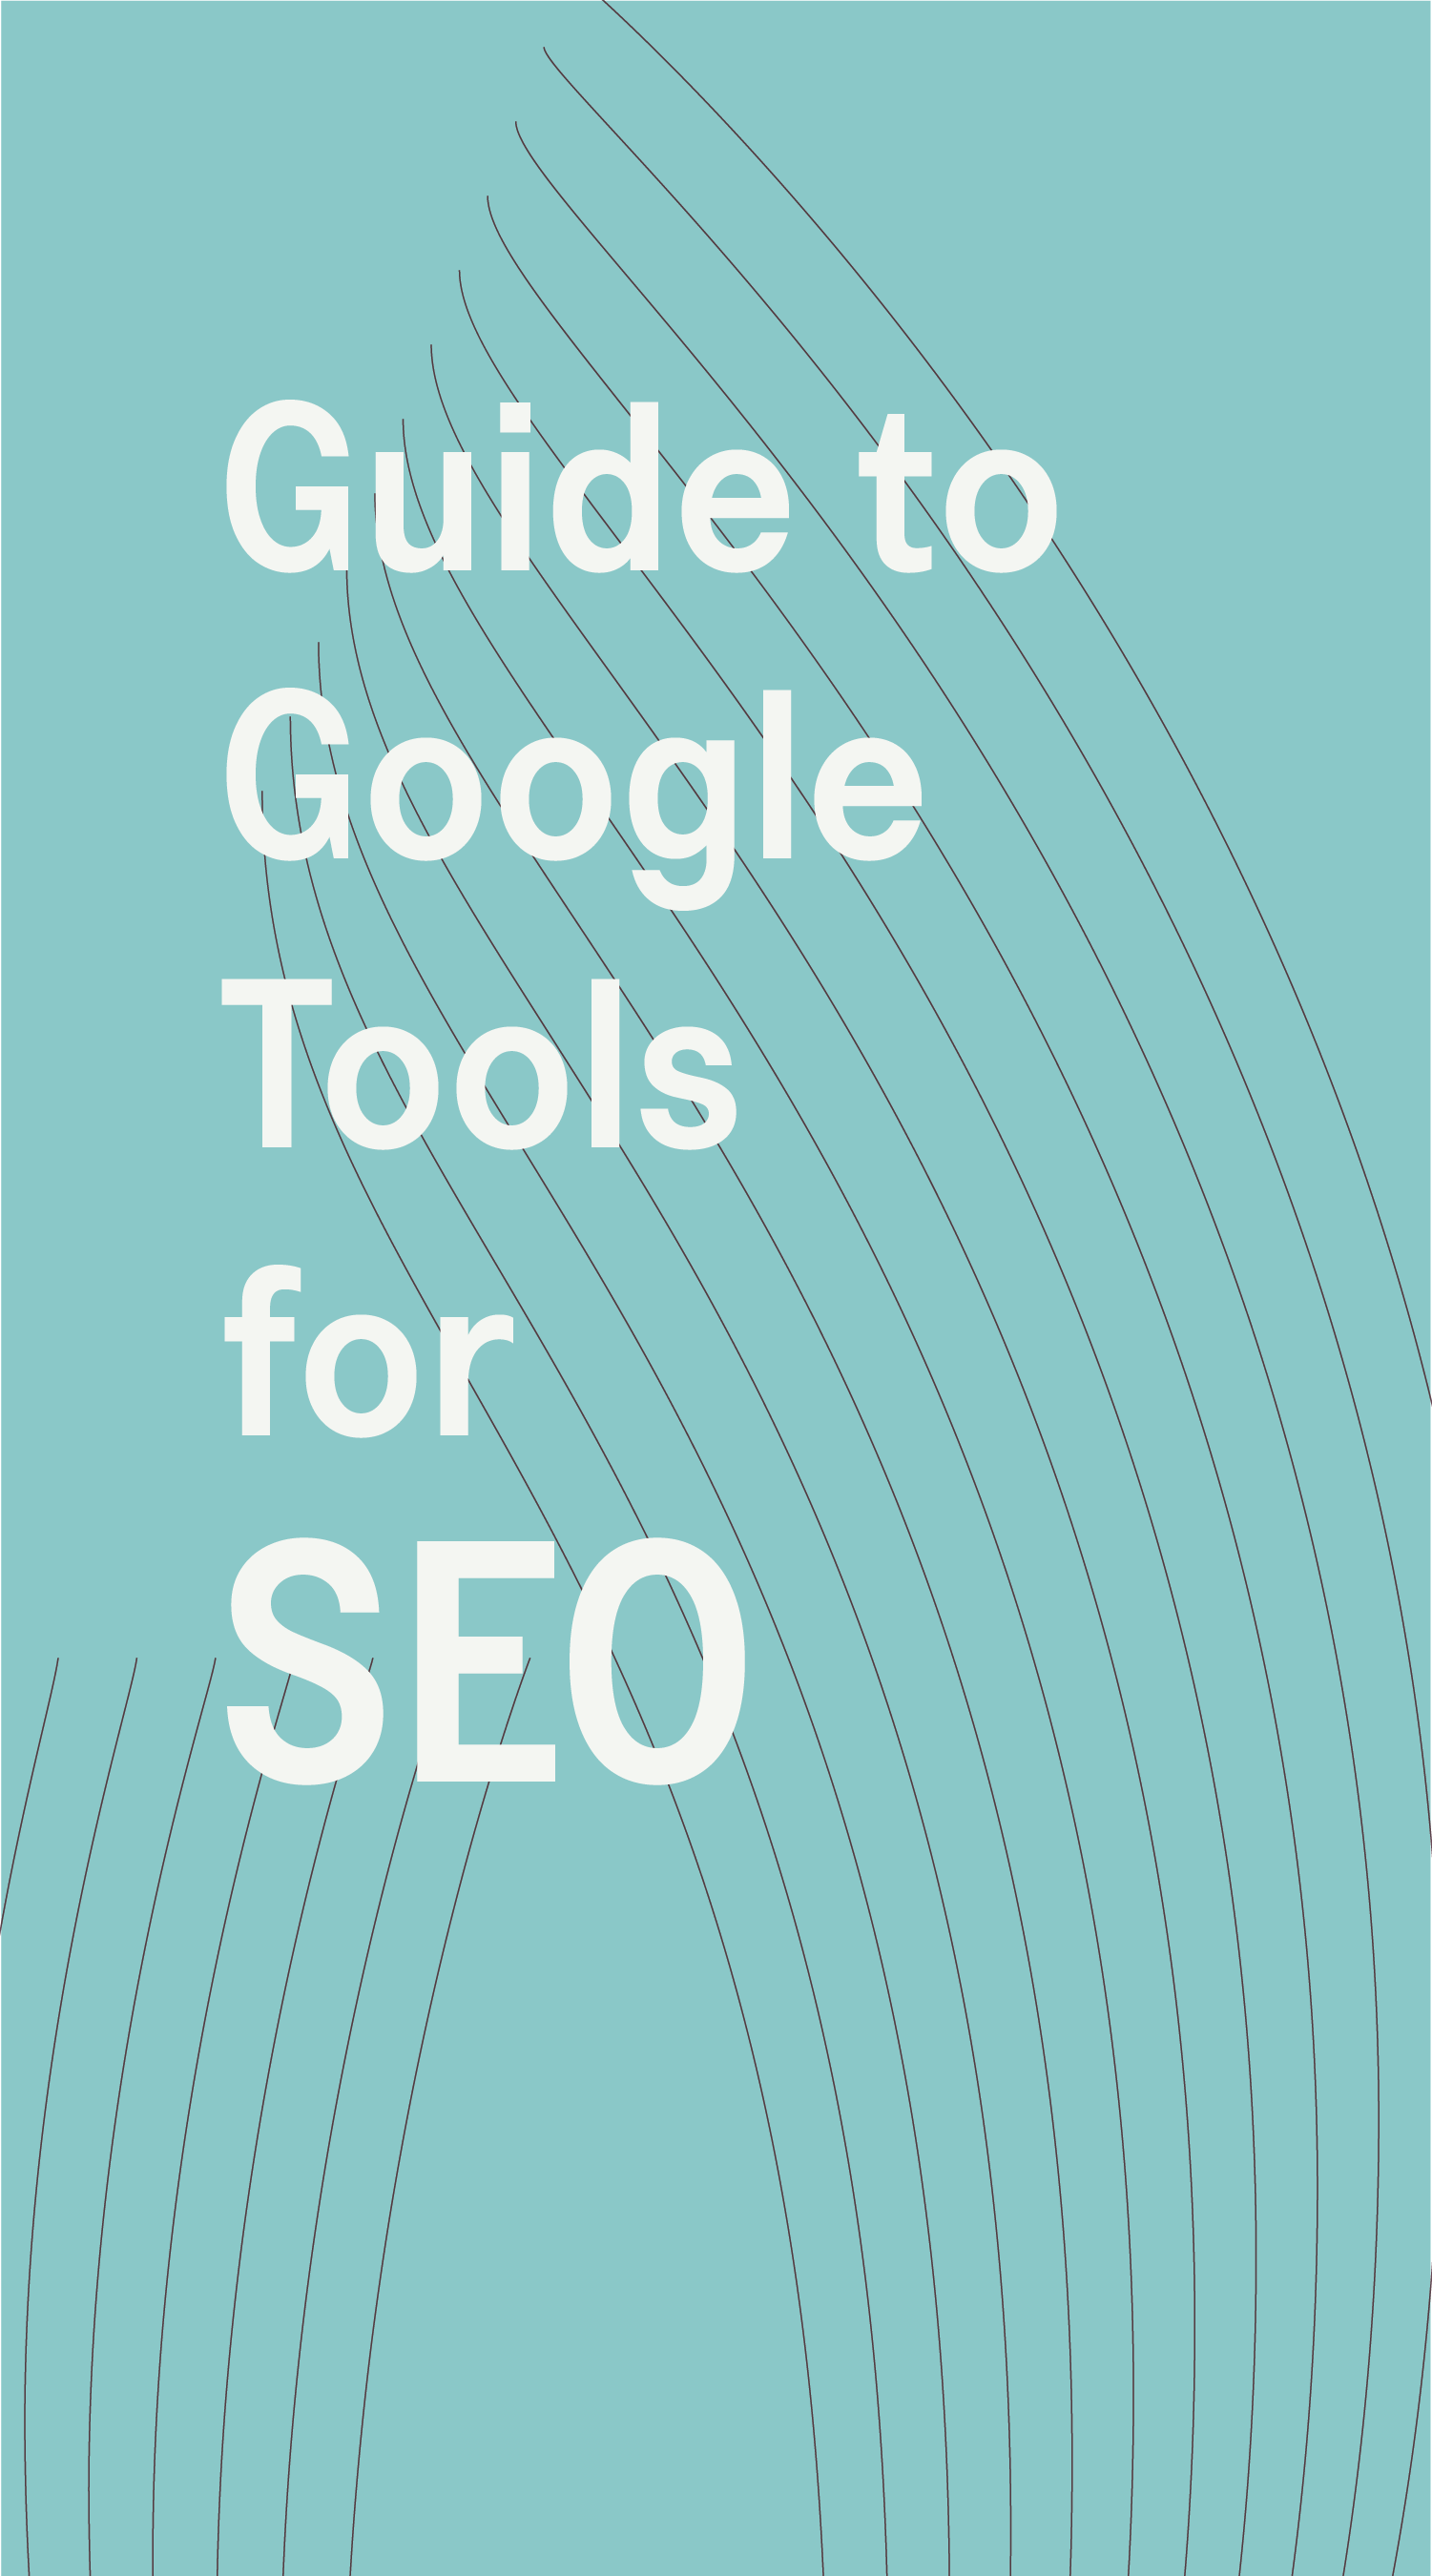 Download a guide to google tools for SEO